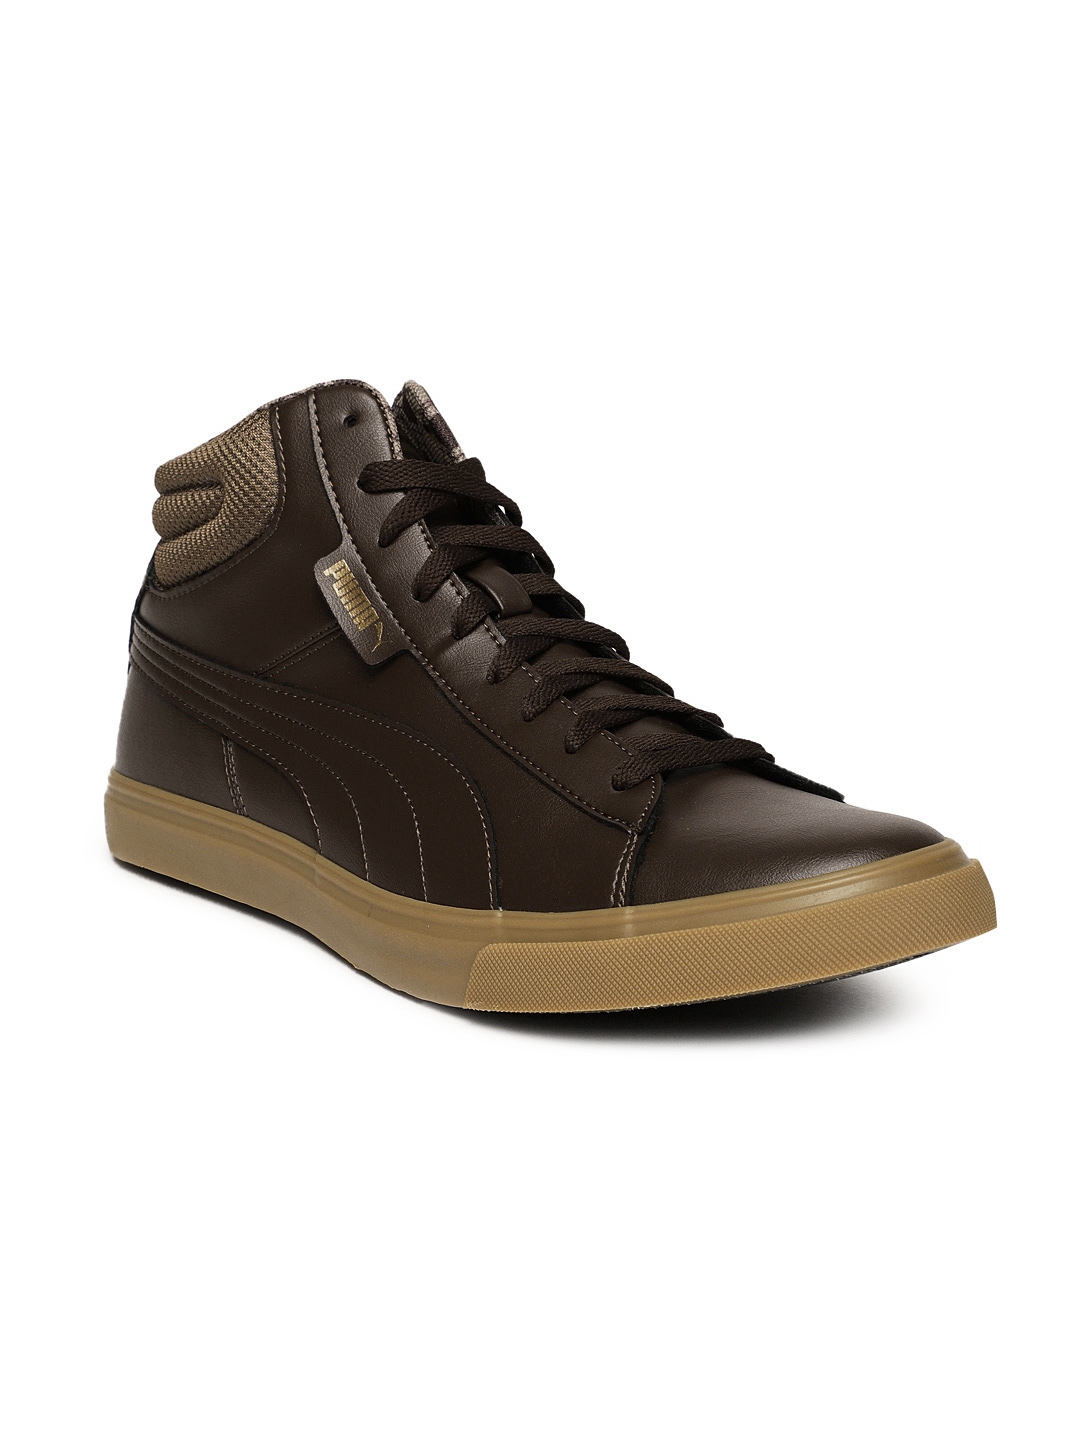 Buy Puma Men Brown Grip Mid Leather Sneakers - Casual Shoes for Men ...